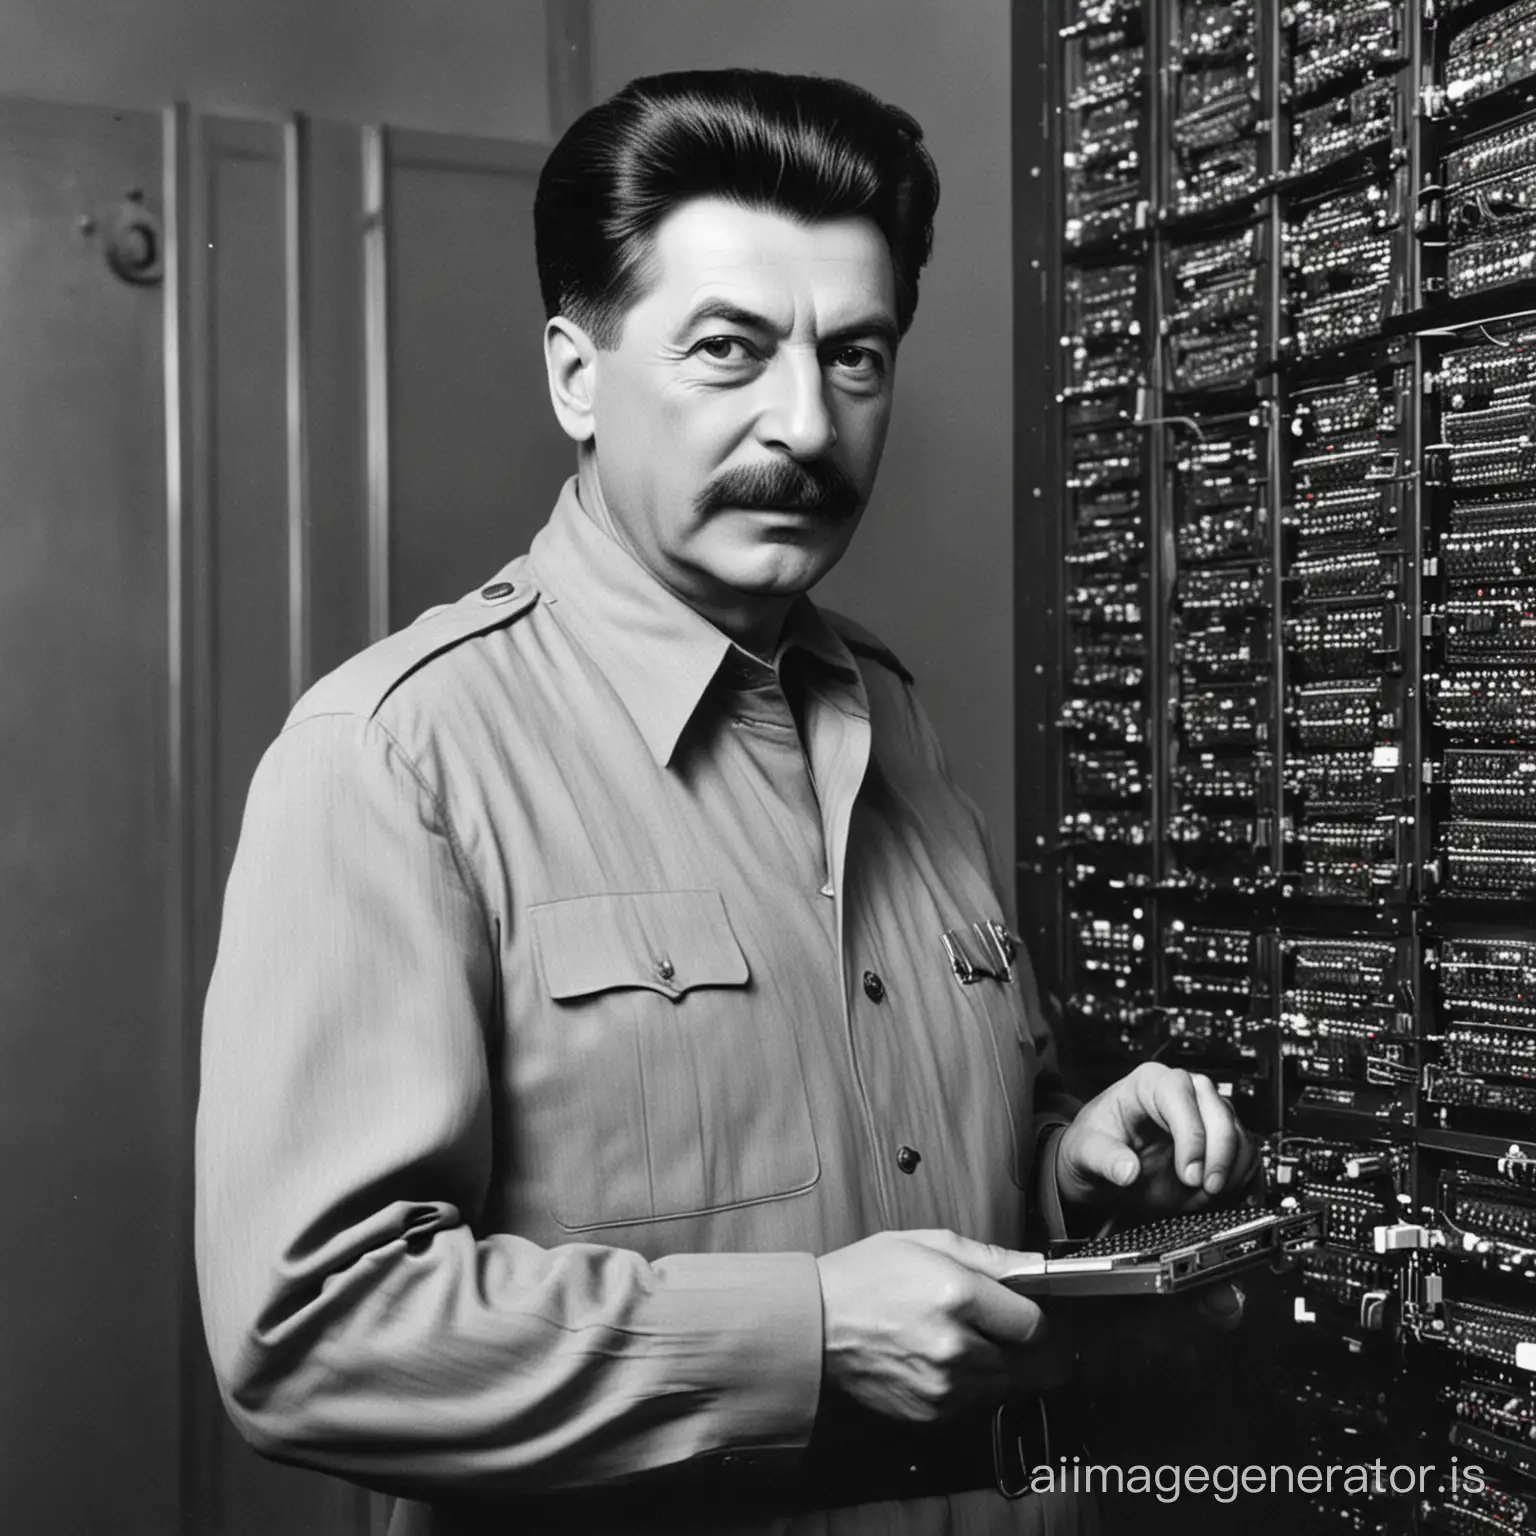 Stalin-Controlling-the-Future-with-a-Supercomputer